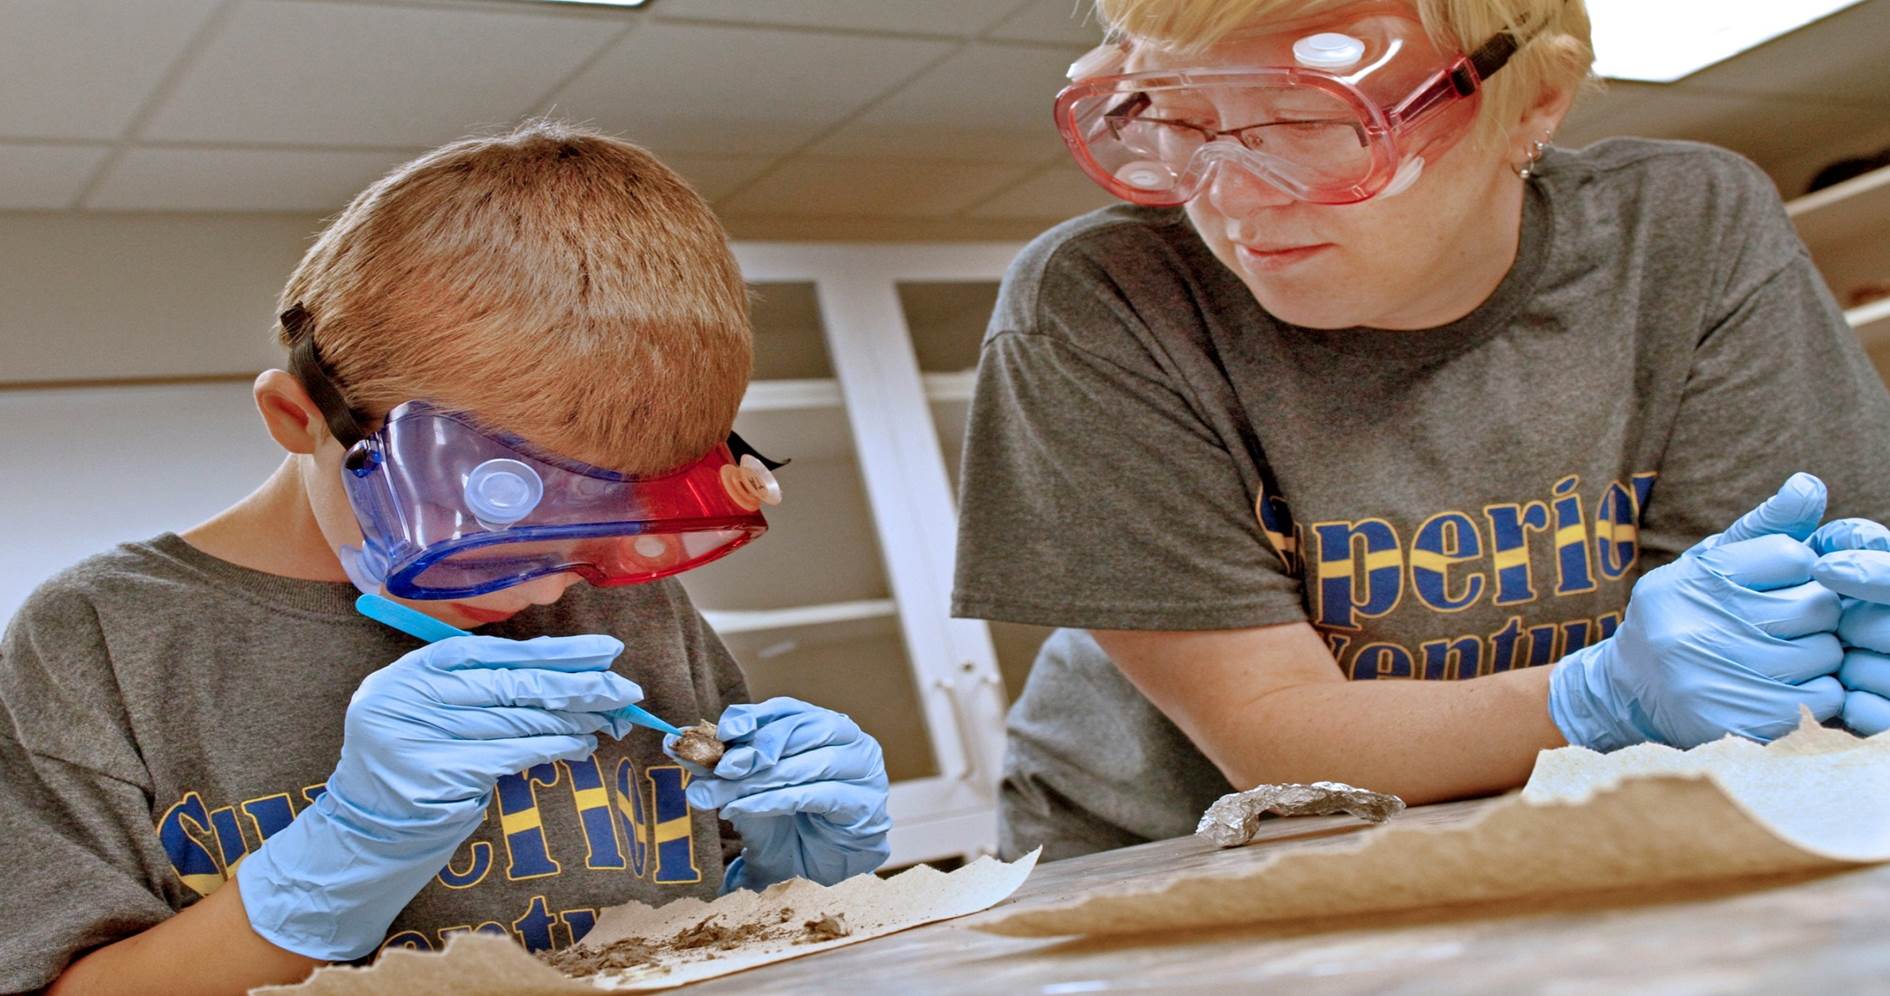 Lake State secondary education student working with student in science camp